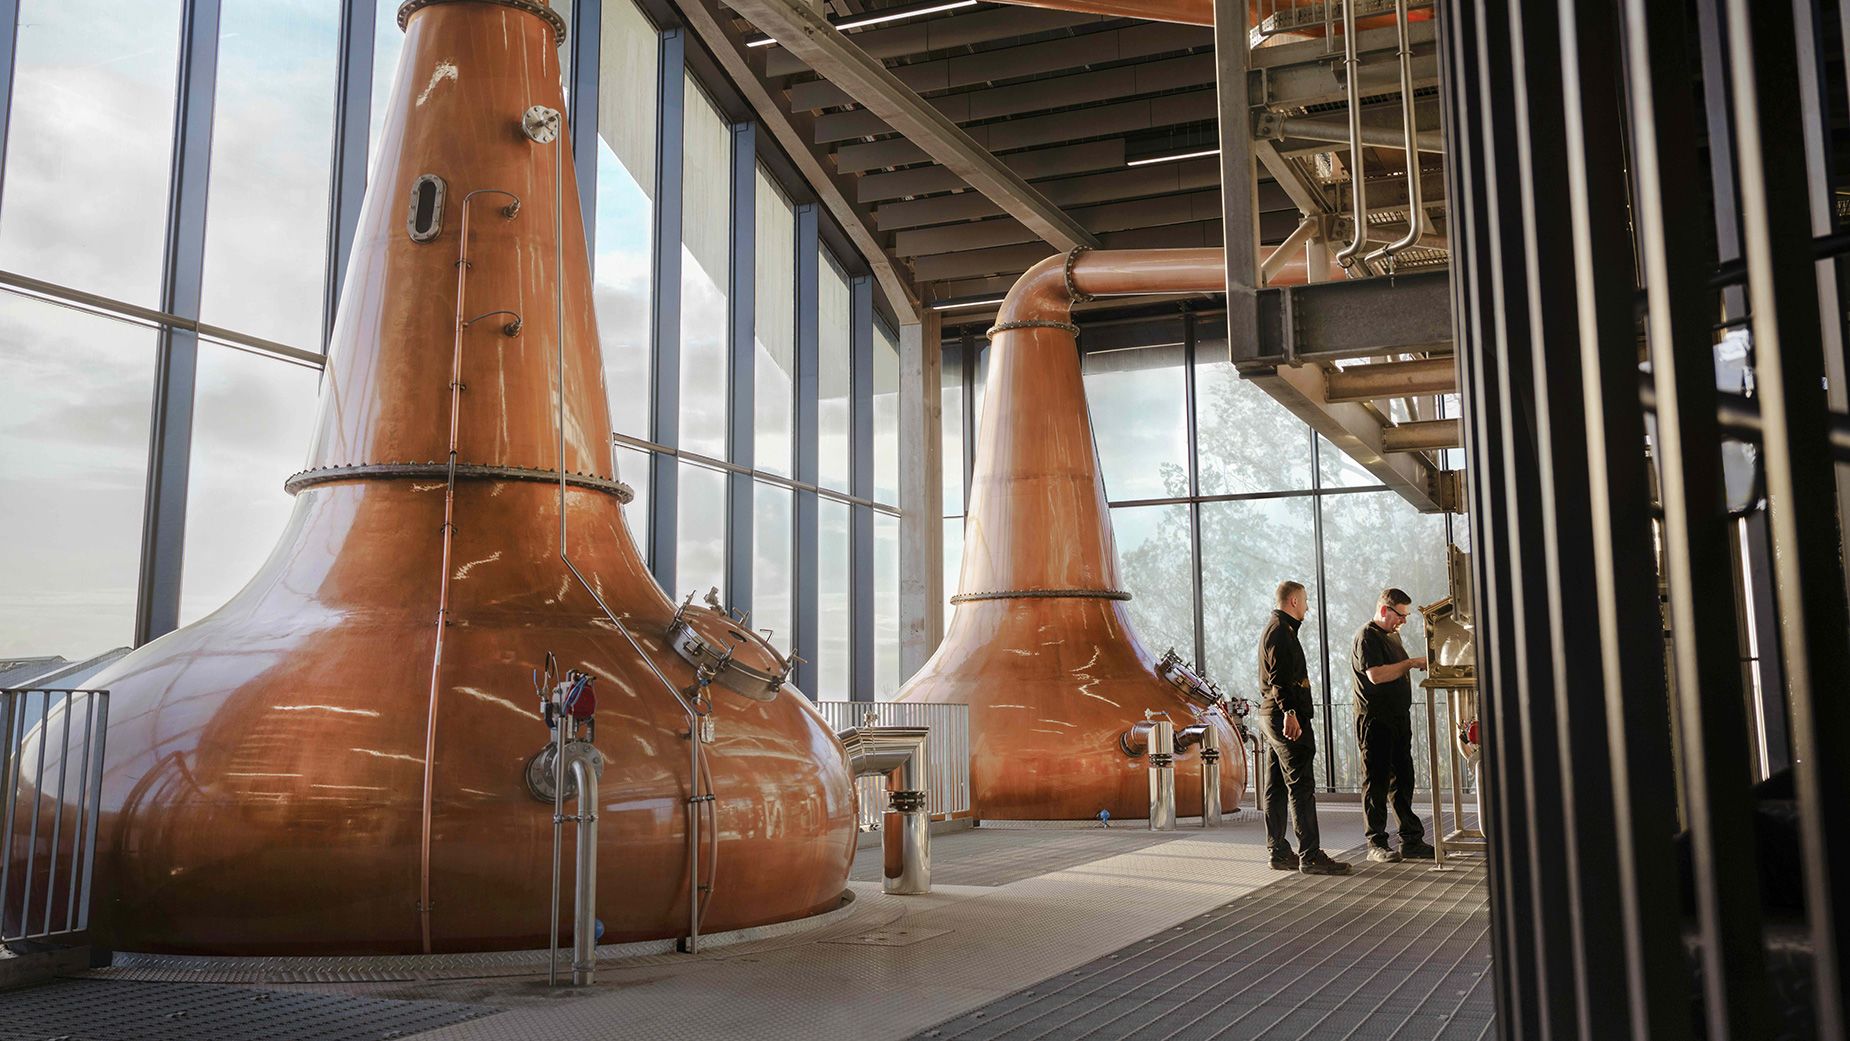 The Port Ellen distillery on Islay in Scotland has reopened 40 years after it was mothballed.